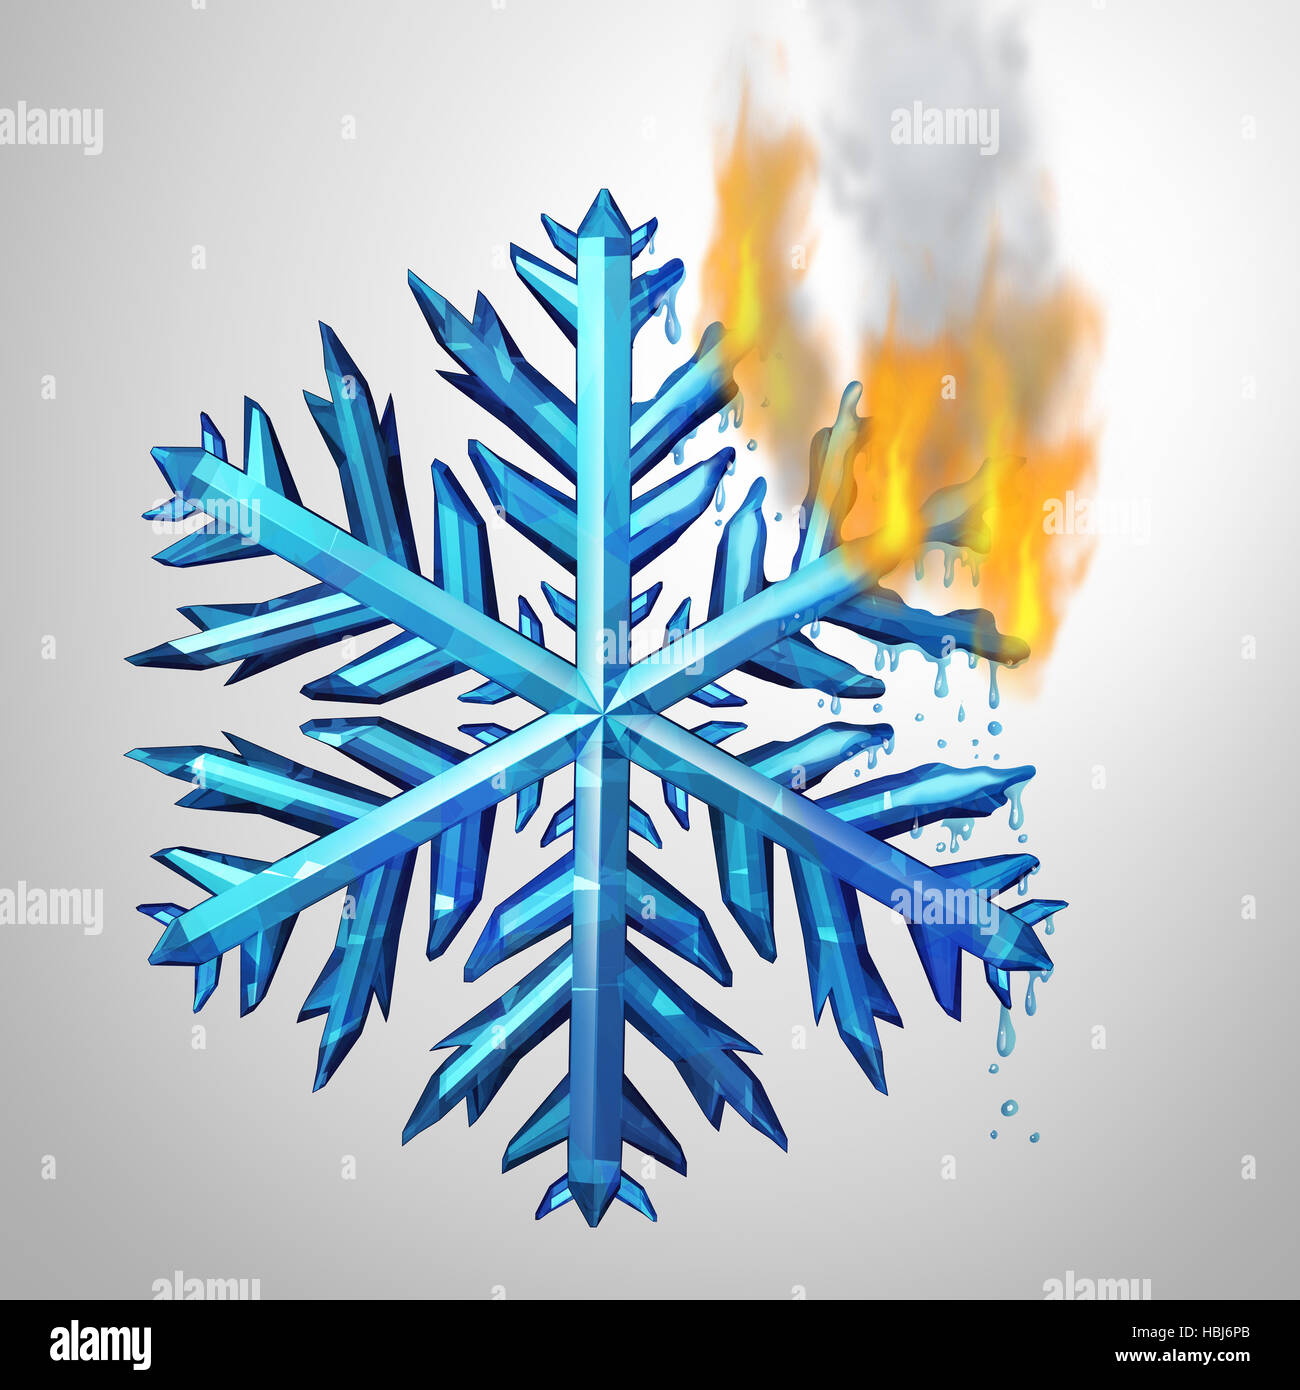 Changing climate concept as a frozen ice crystal snowflake melting and burning in flames as an environmental metaphor for changing weather temerature Stock Photo